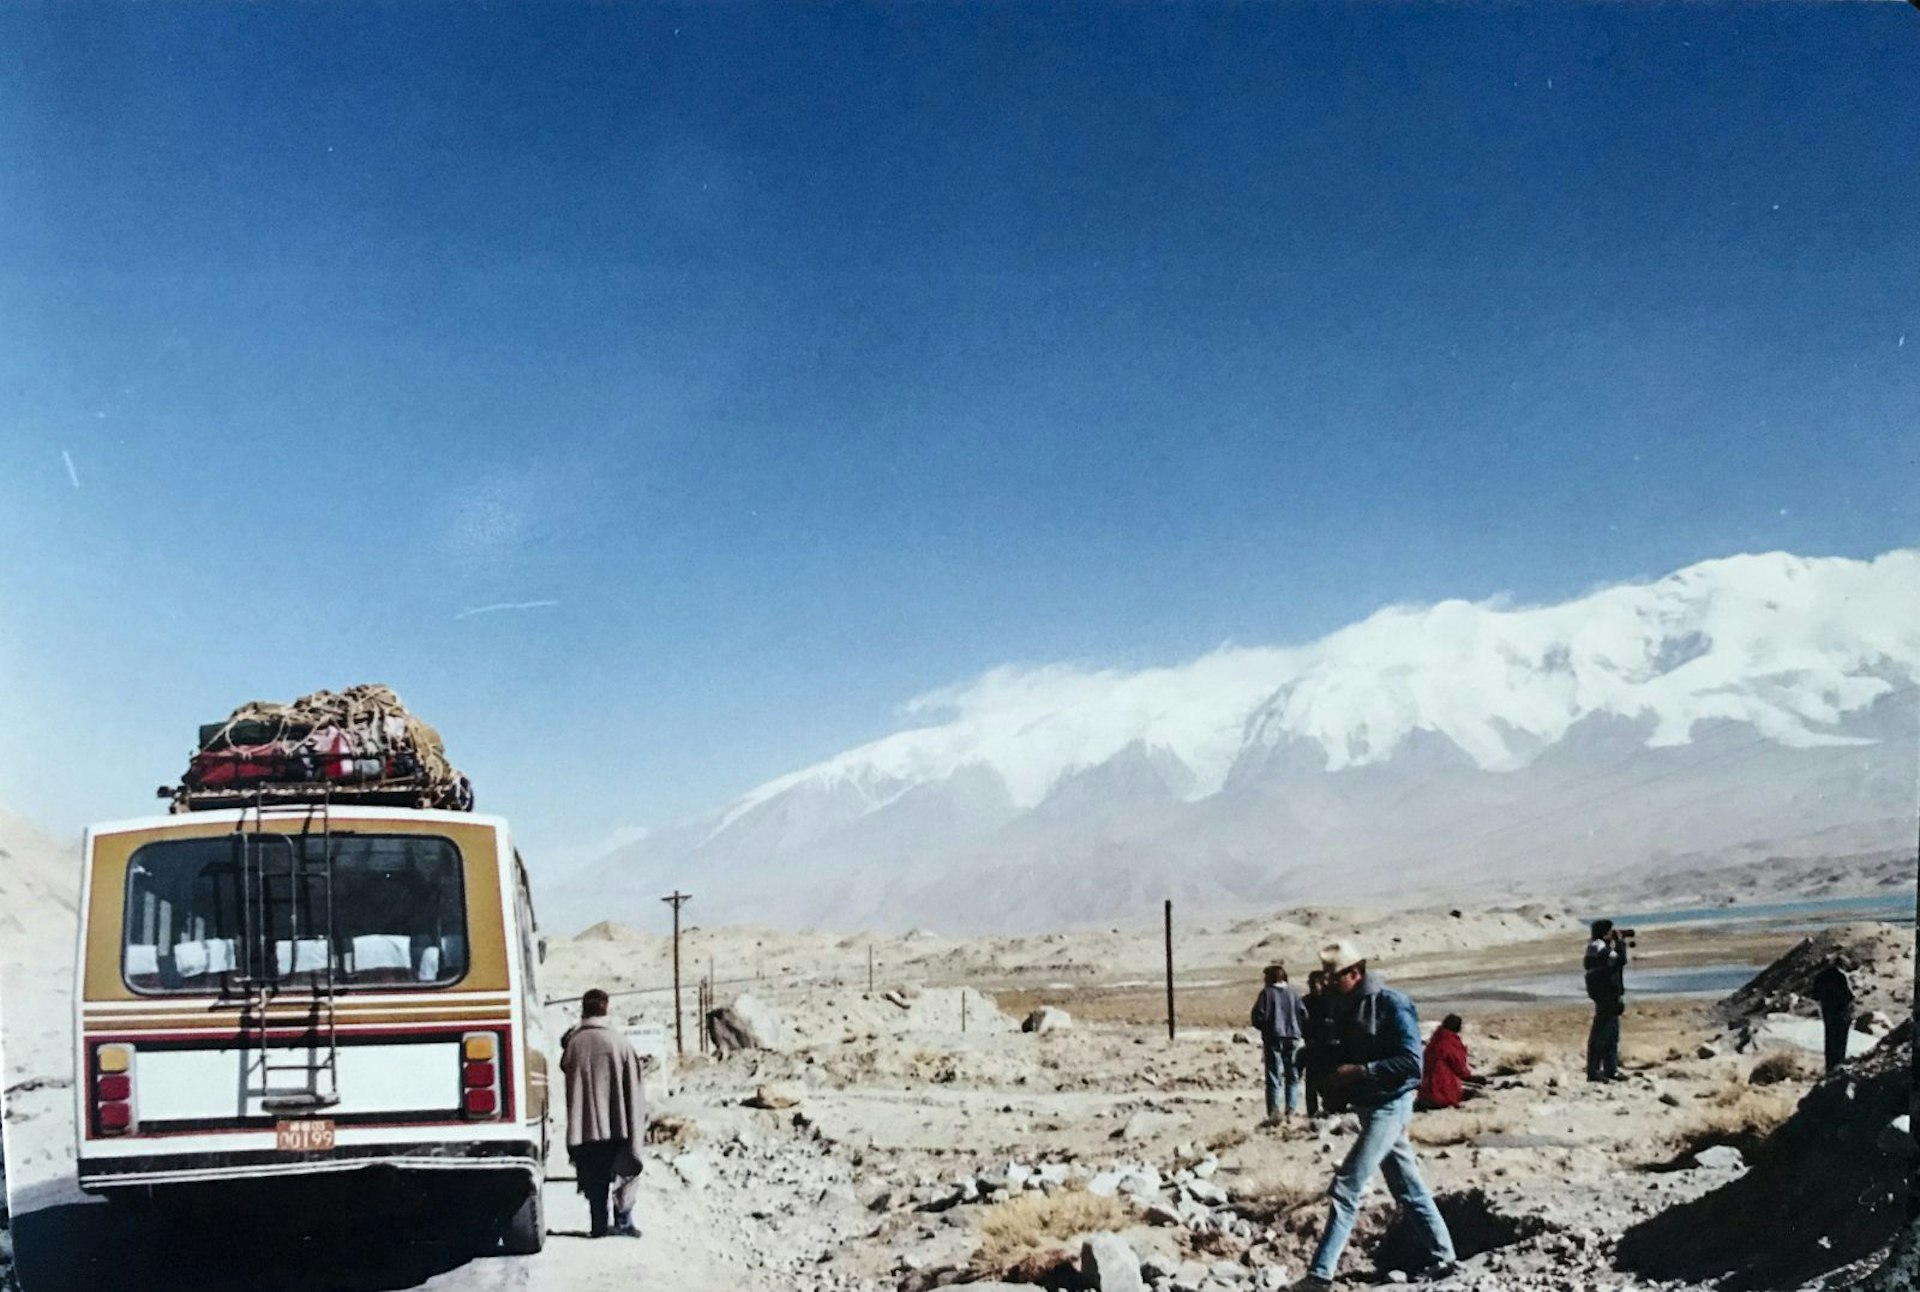 A bus is stopped on a remote road on the left of the picture. People are standing around taking pictures on the rocky ground to the right. Snow capped mountains loom in the back of the photo and the sky is blue and cloudless.